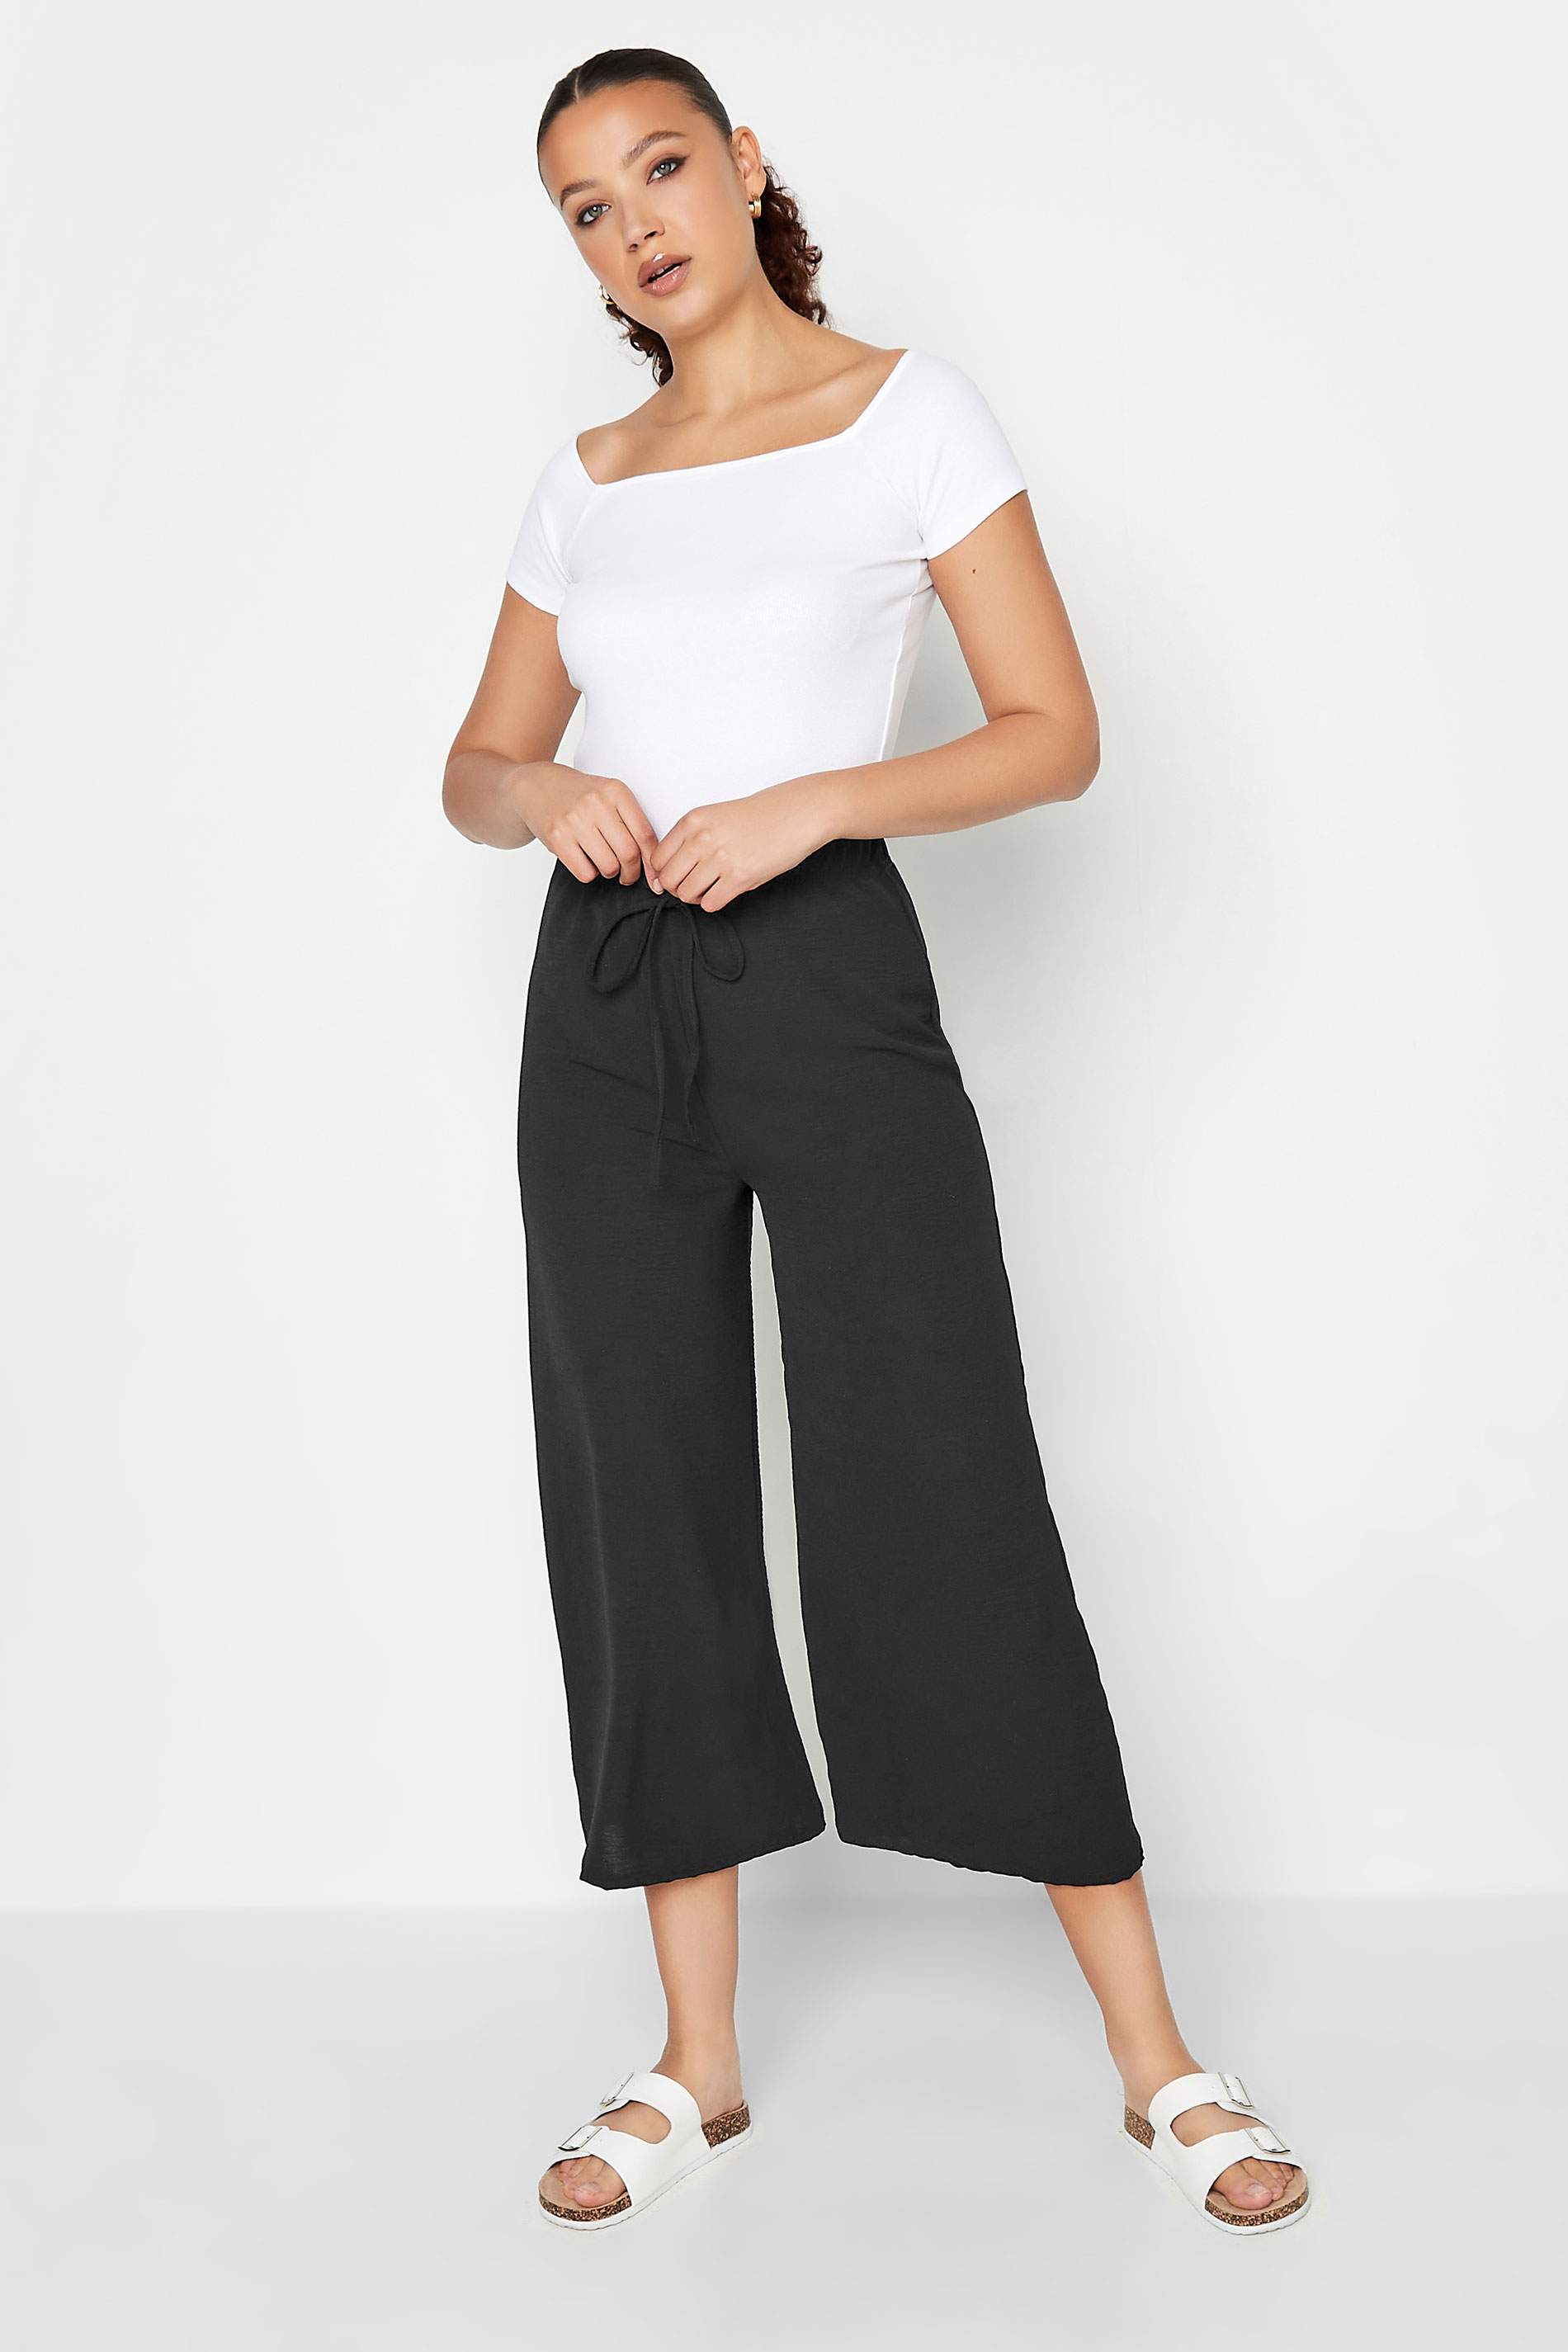 LTS Tall Black Crepe Wide Leg Cropped Trousers | Long Tall Sally 2